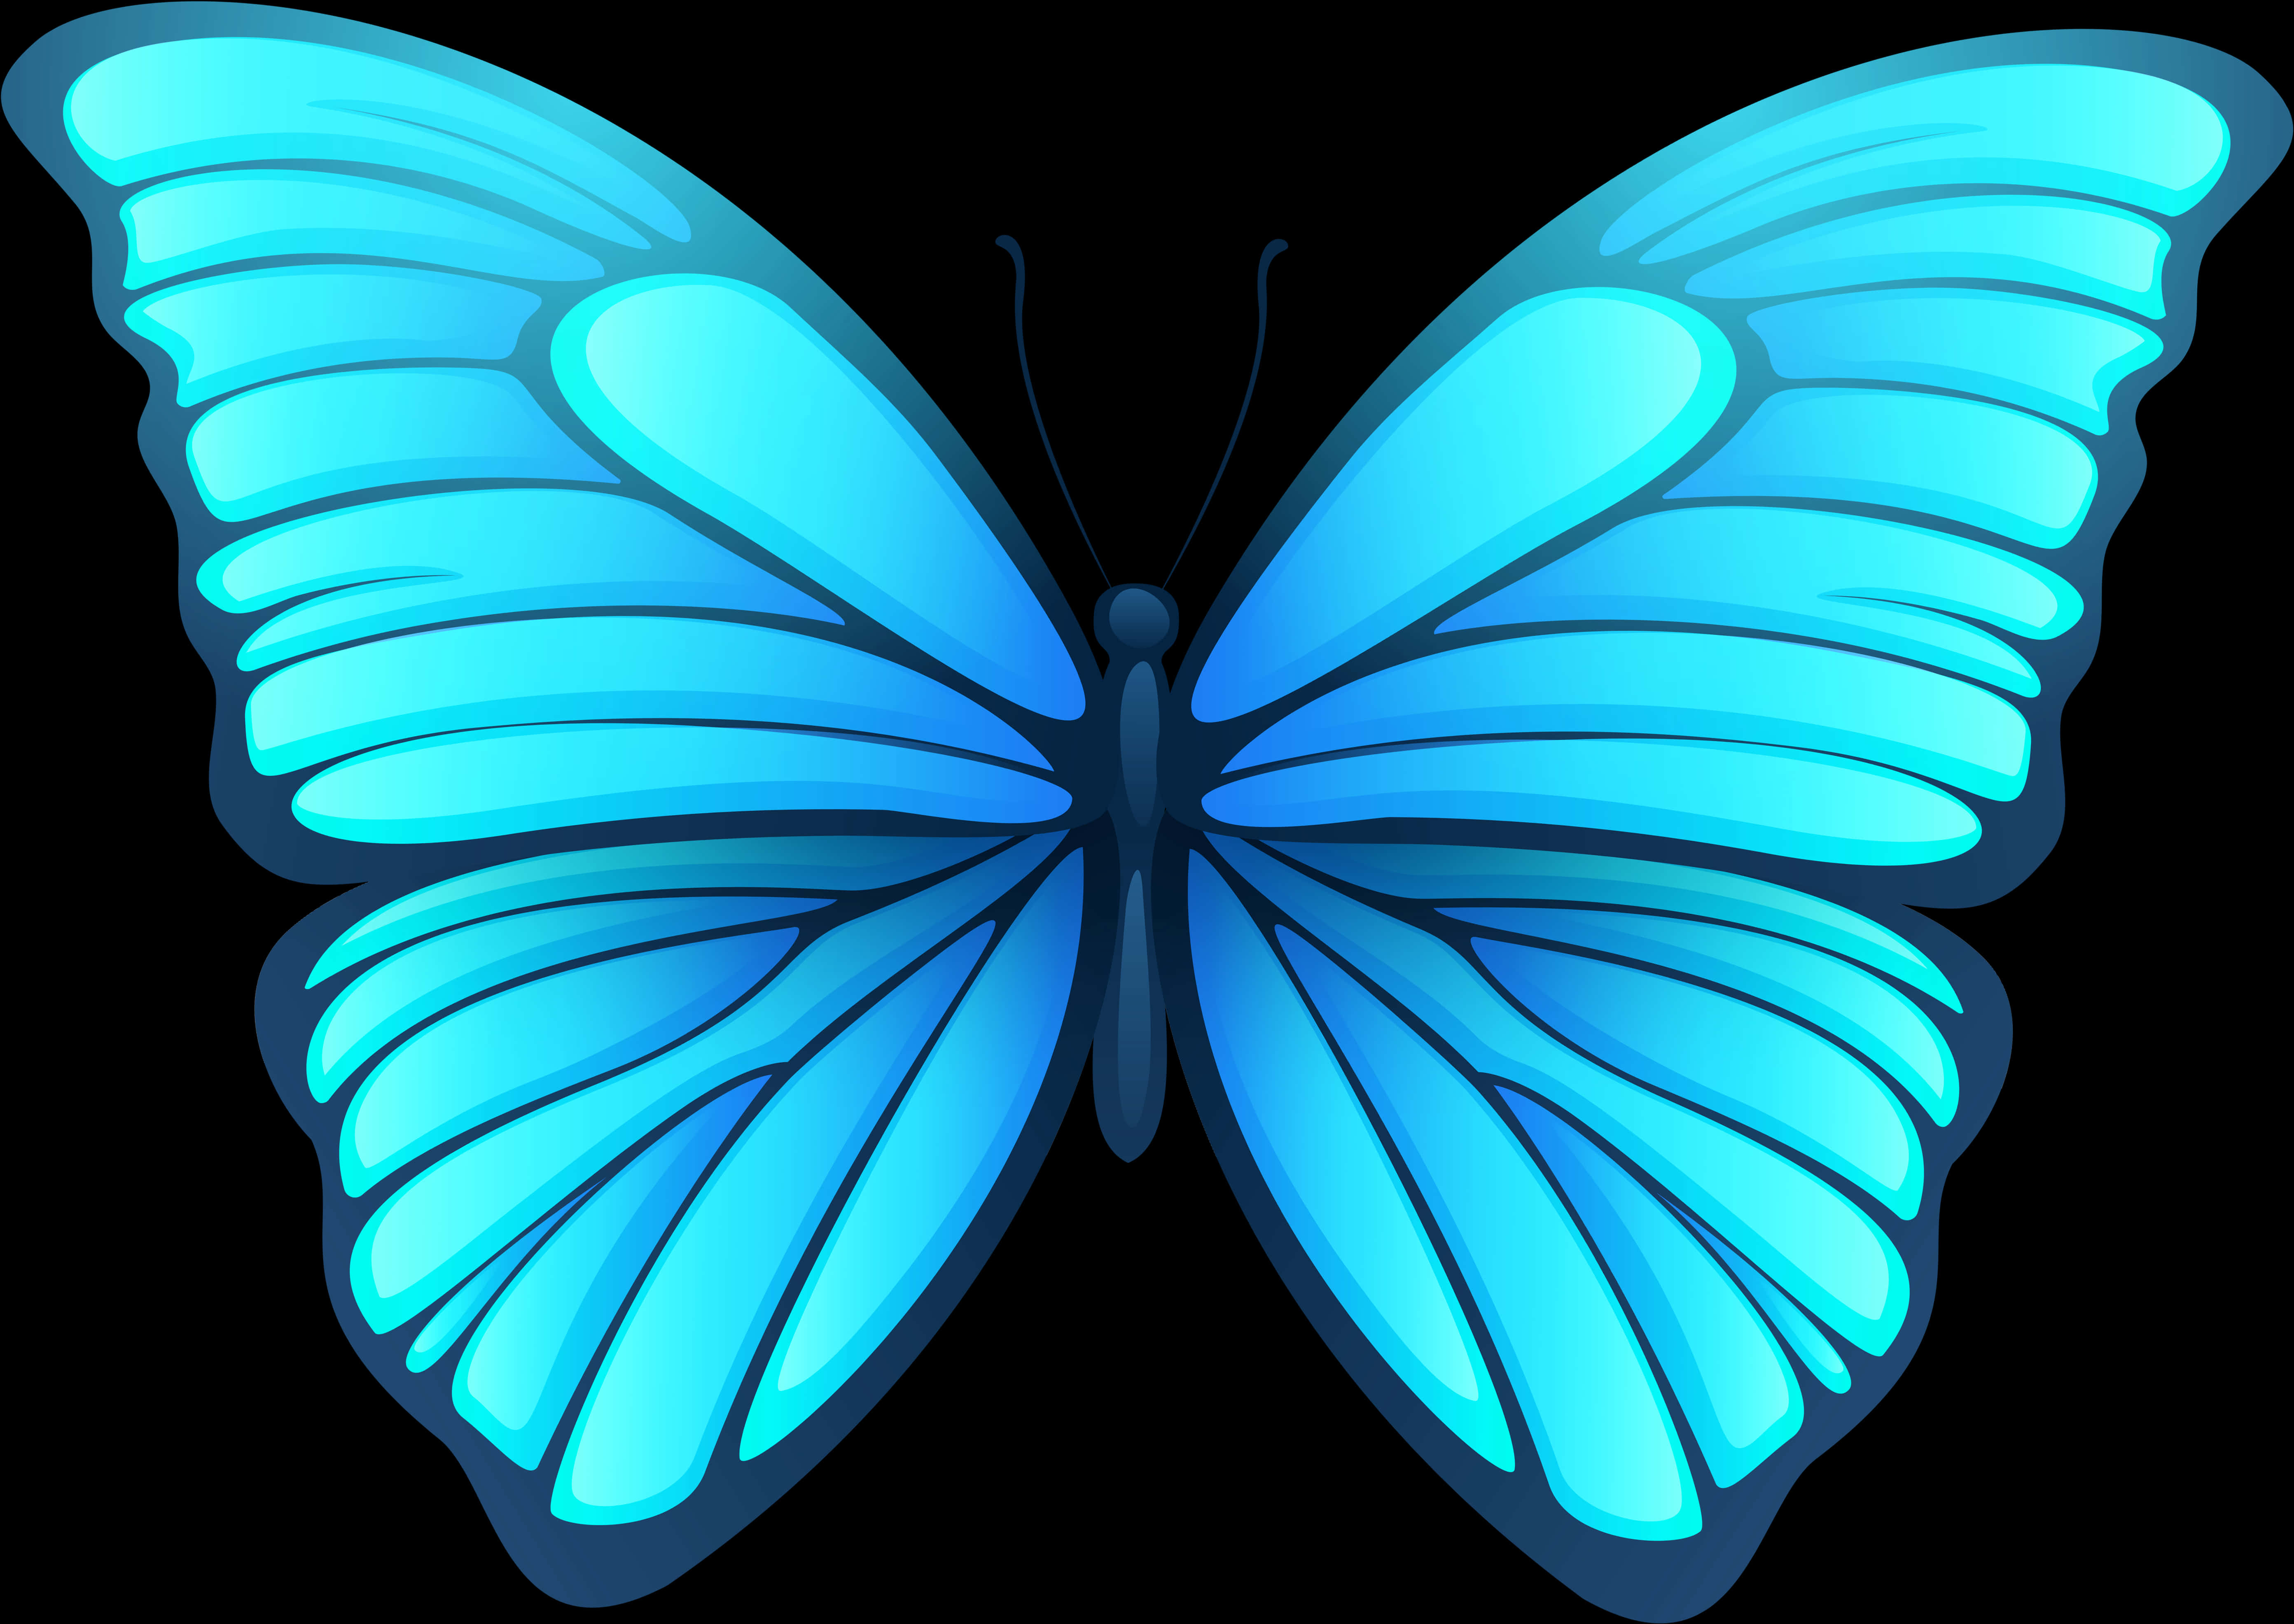 Blue Butterfly Illustration PNG image